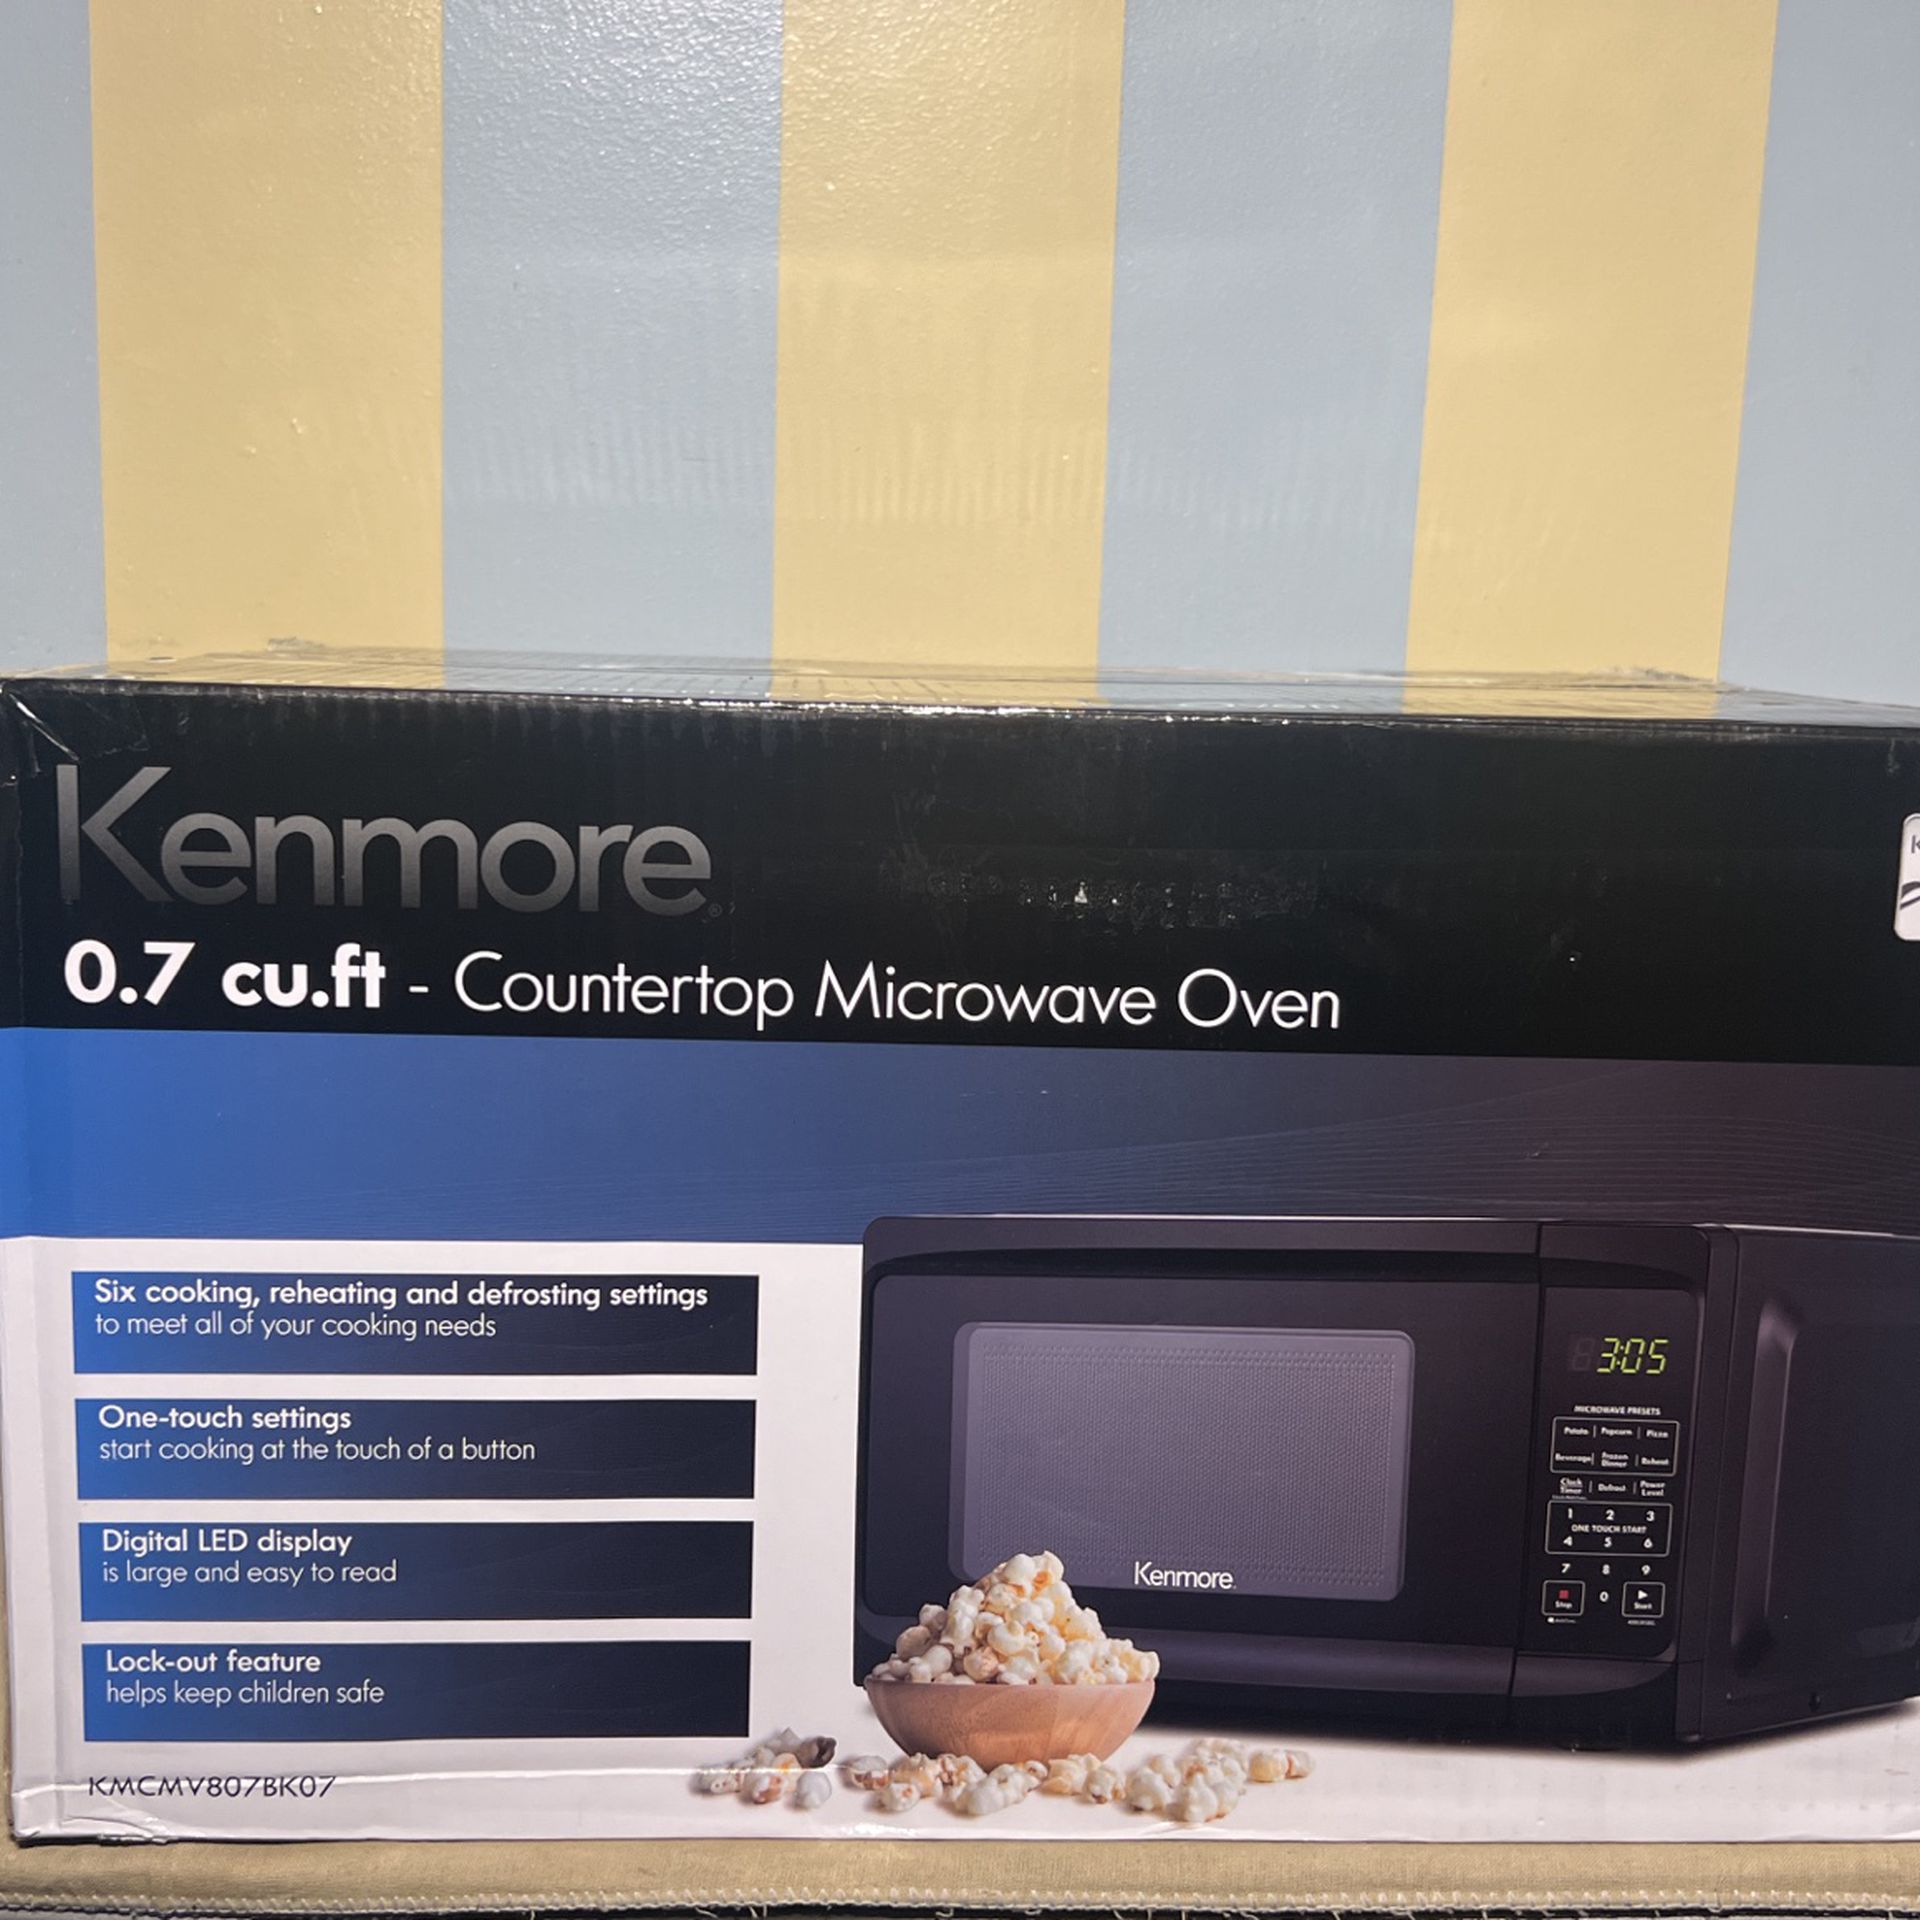 Kenmore 0.7 cu.ft Countertop Microwave oven for Sale in Philadelphia, PA -  OfferUp